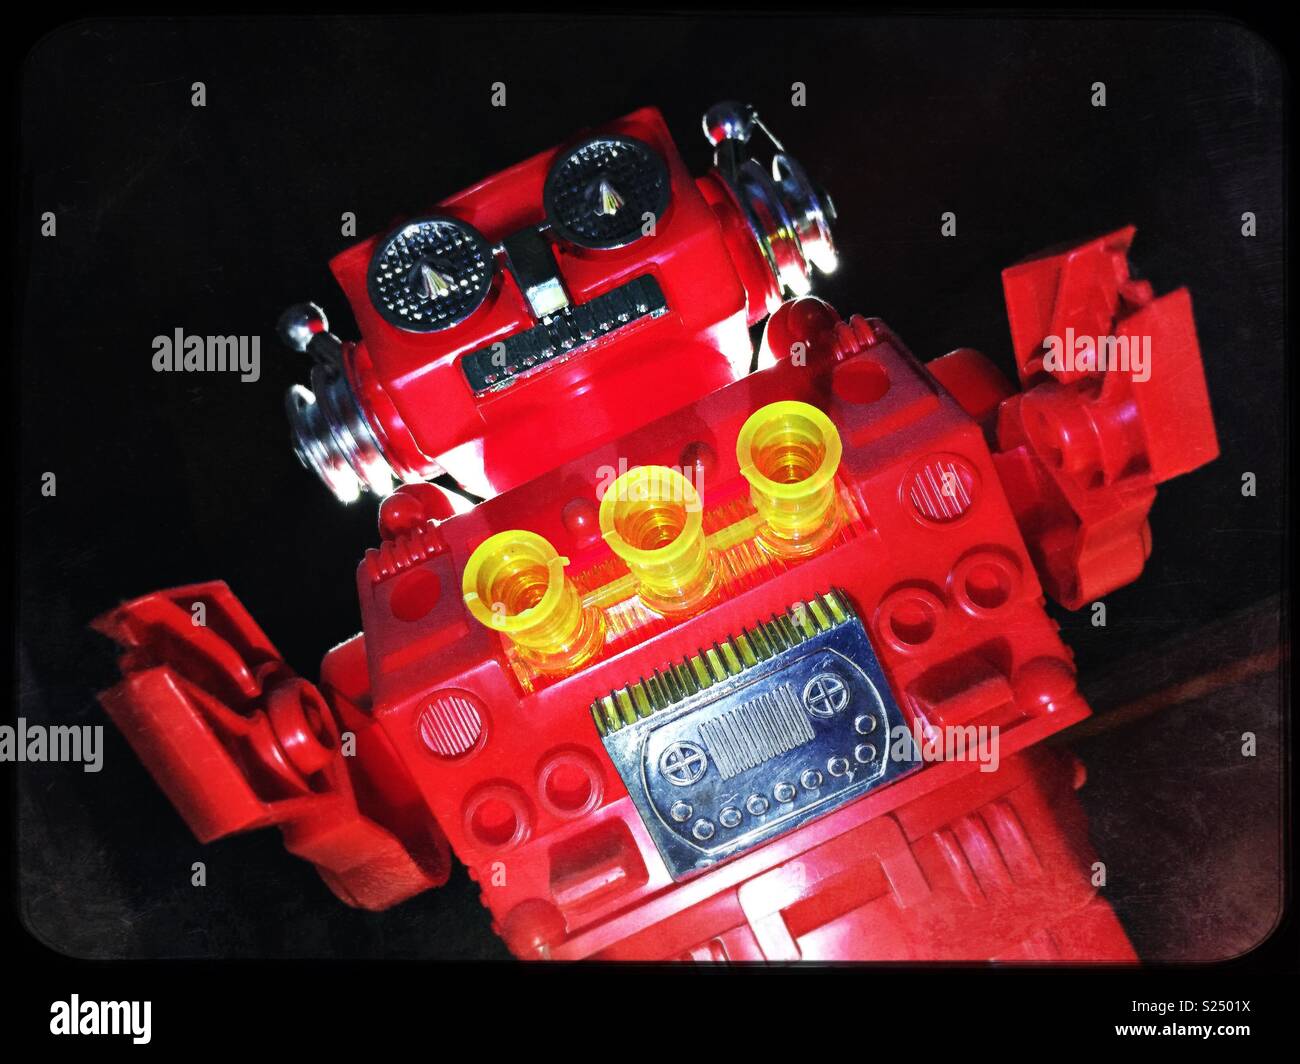 Große bedrohliche Rote scary Roboter Stockfoto